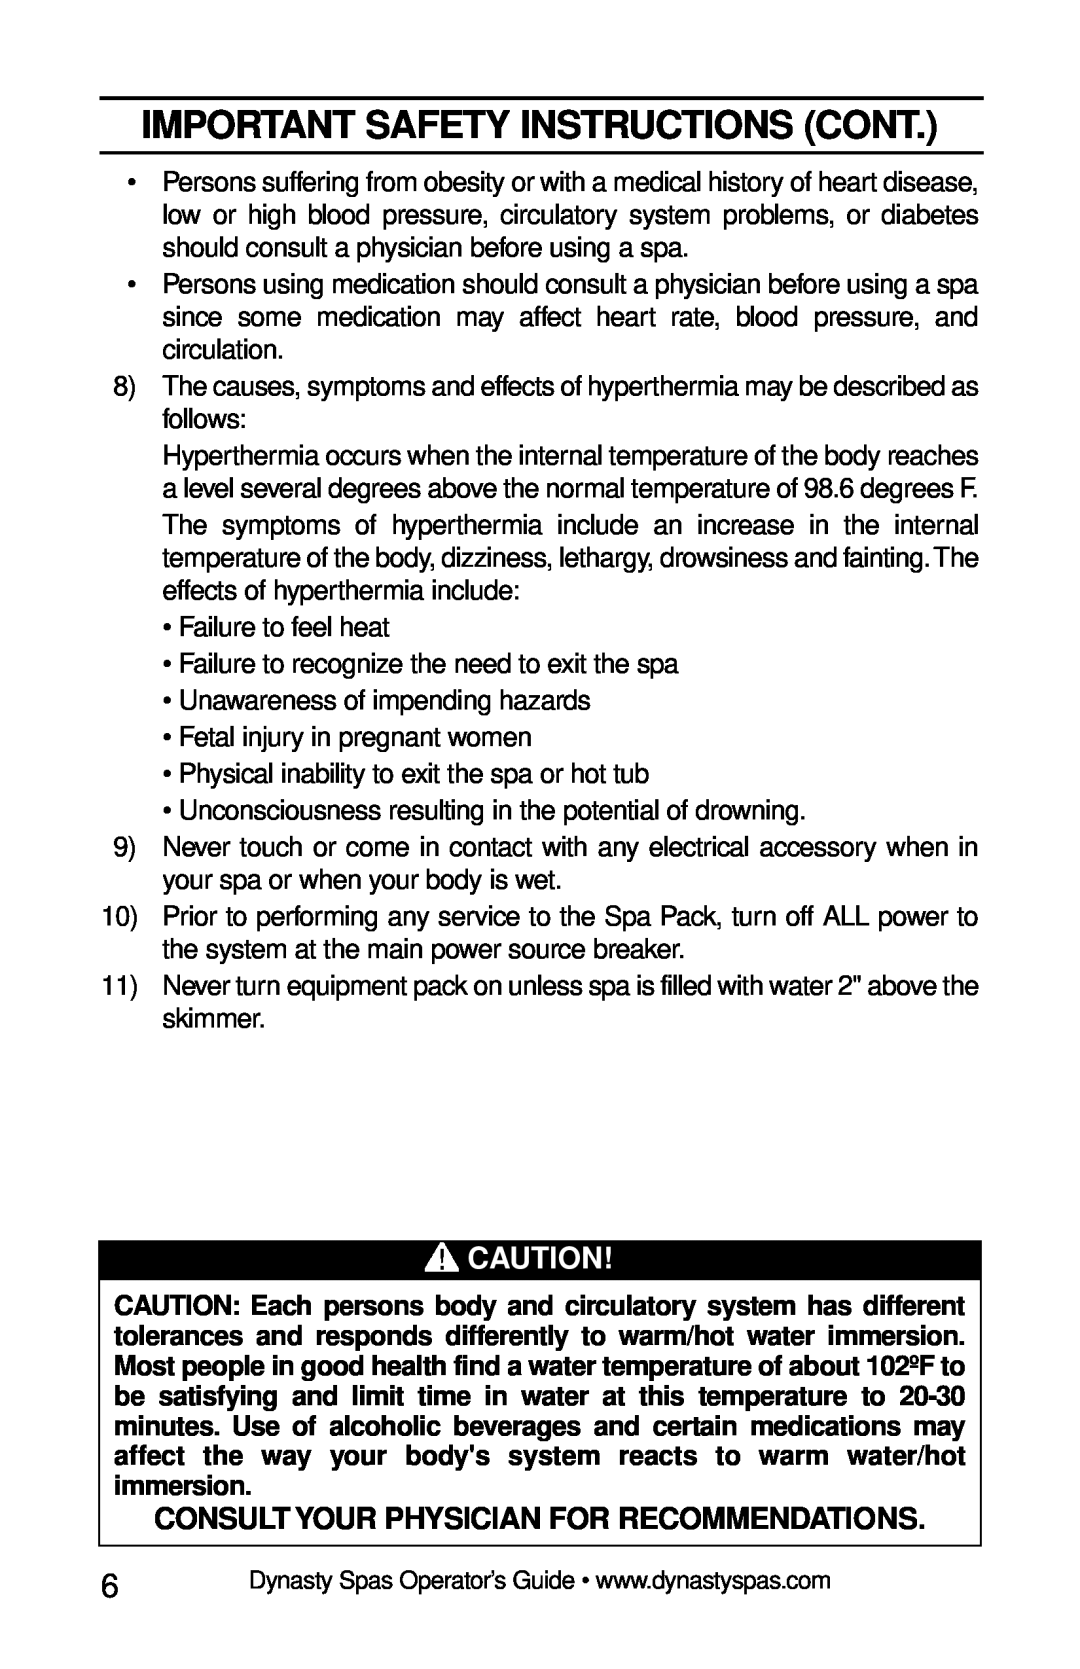 Dynasty Spas 2007 manual Important Safety Instructions Cont, Consult Your Physician For Recommendations 